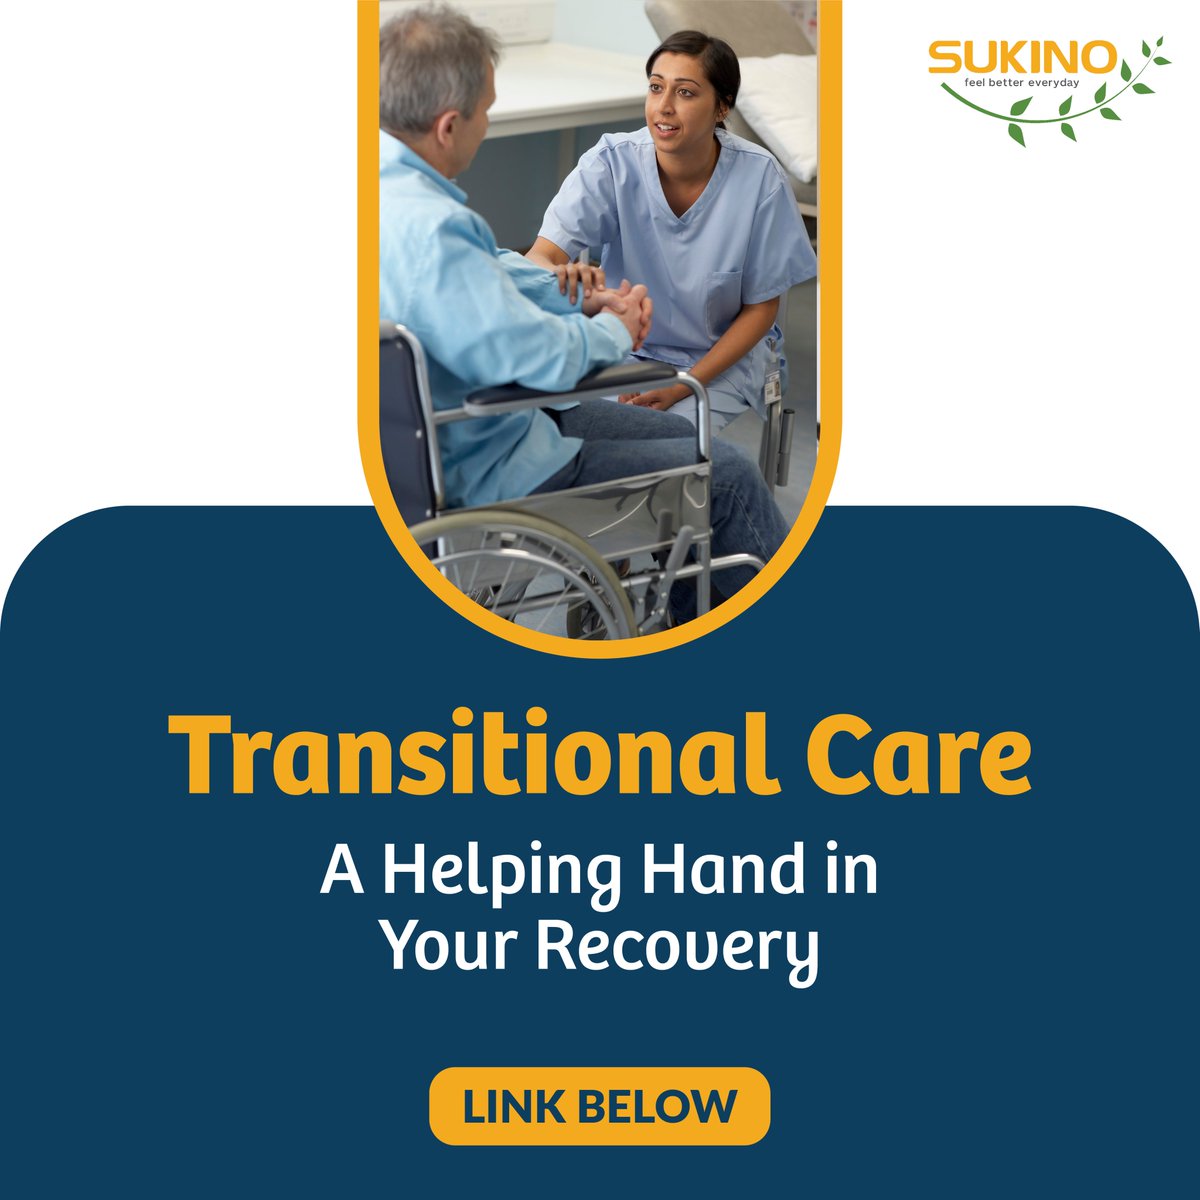 Discover the importance of Transition Care in the healthcare system and how it benefits patients after hospitalization.

𝐑𝐞𝐚𝐝 𝐡𝐞𝐫𝐞 𝐟𝐨𝐫 𝐦𝐨𝐫𝐞 𝐢𝐧𝐟𝐨𝐫𝐦𝐚𝐭𝐢𝐨𝐧: sukinohealthcare.com/what-is-transi…

#TransitionCare #PatientRecovery #HolisticHealthcare #sukinorehab #sukino